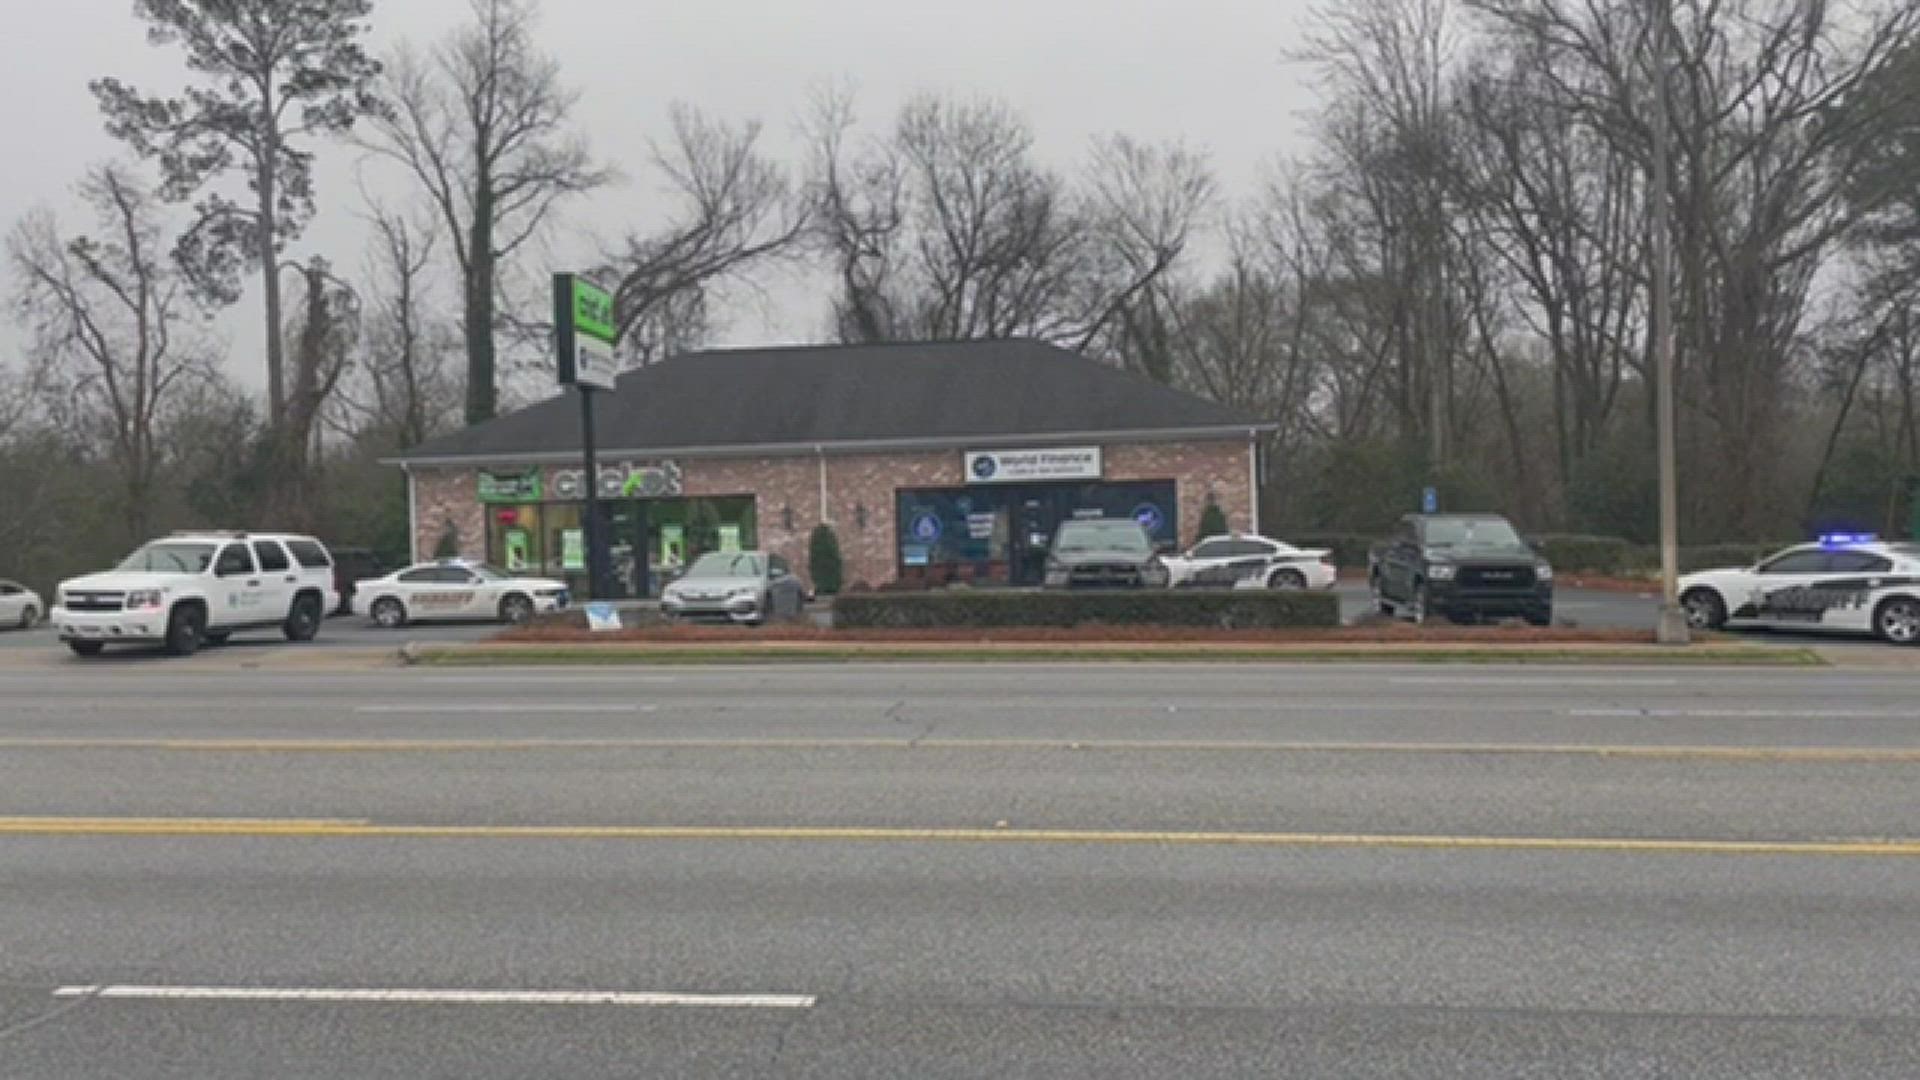 A person was shot in the leg at the Cricket Wireless on Gray Highway in Macon